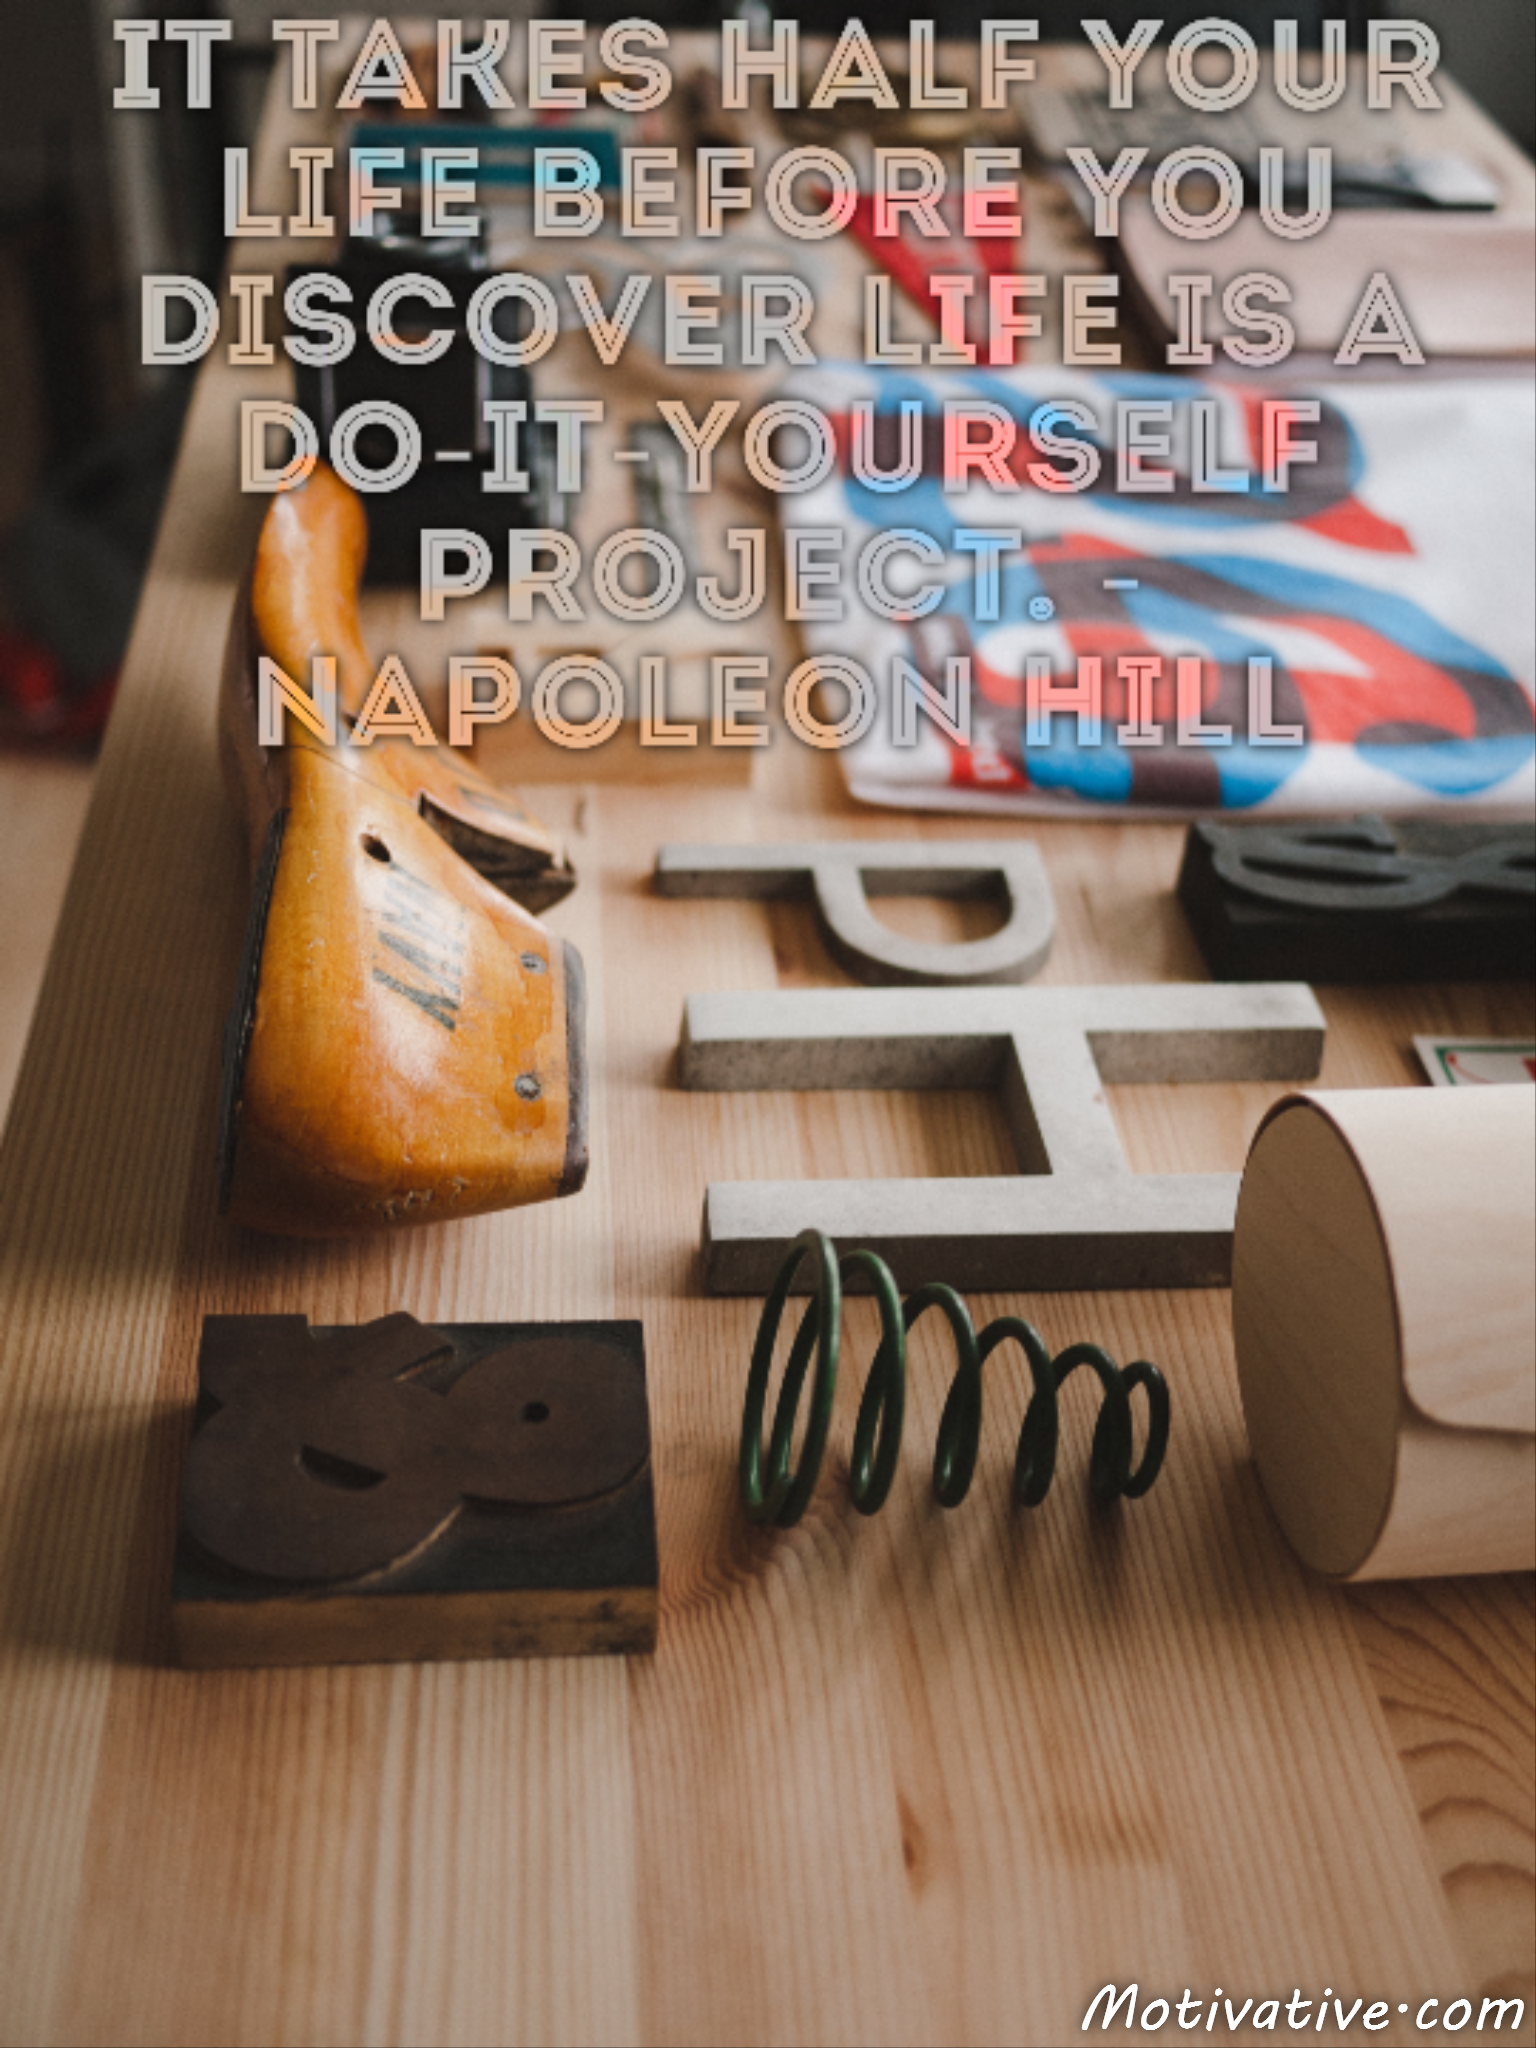 It takes half your life before you discover life is a do-it-yourself project. – Napoleon Hill